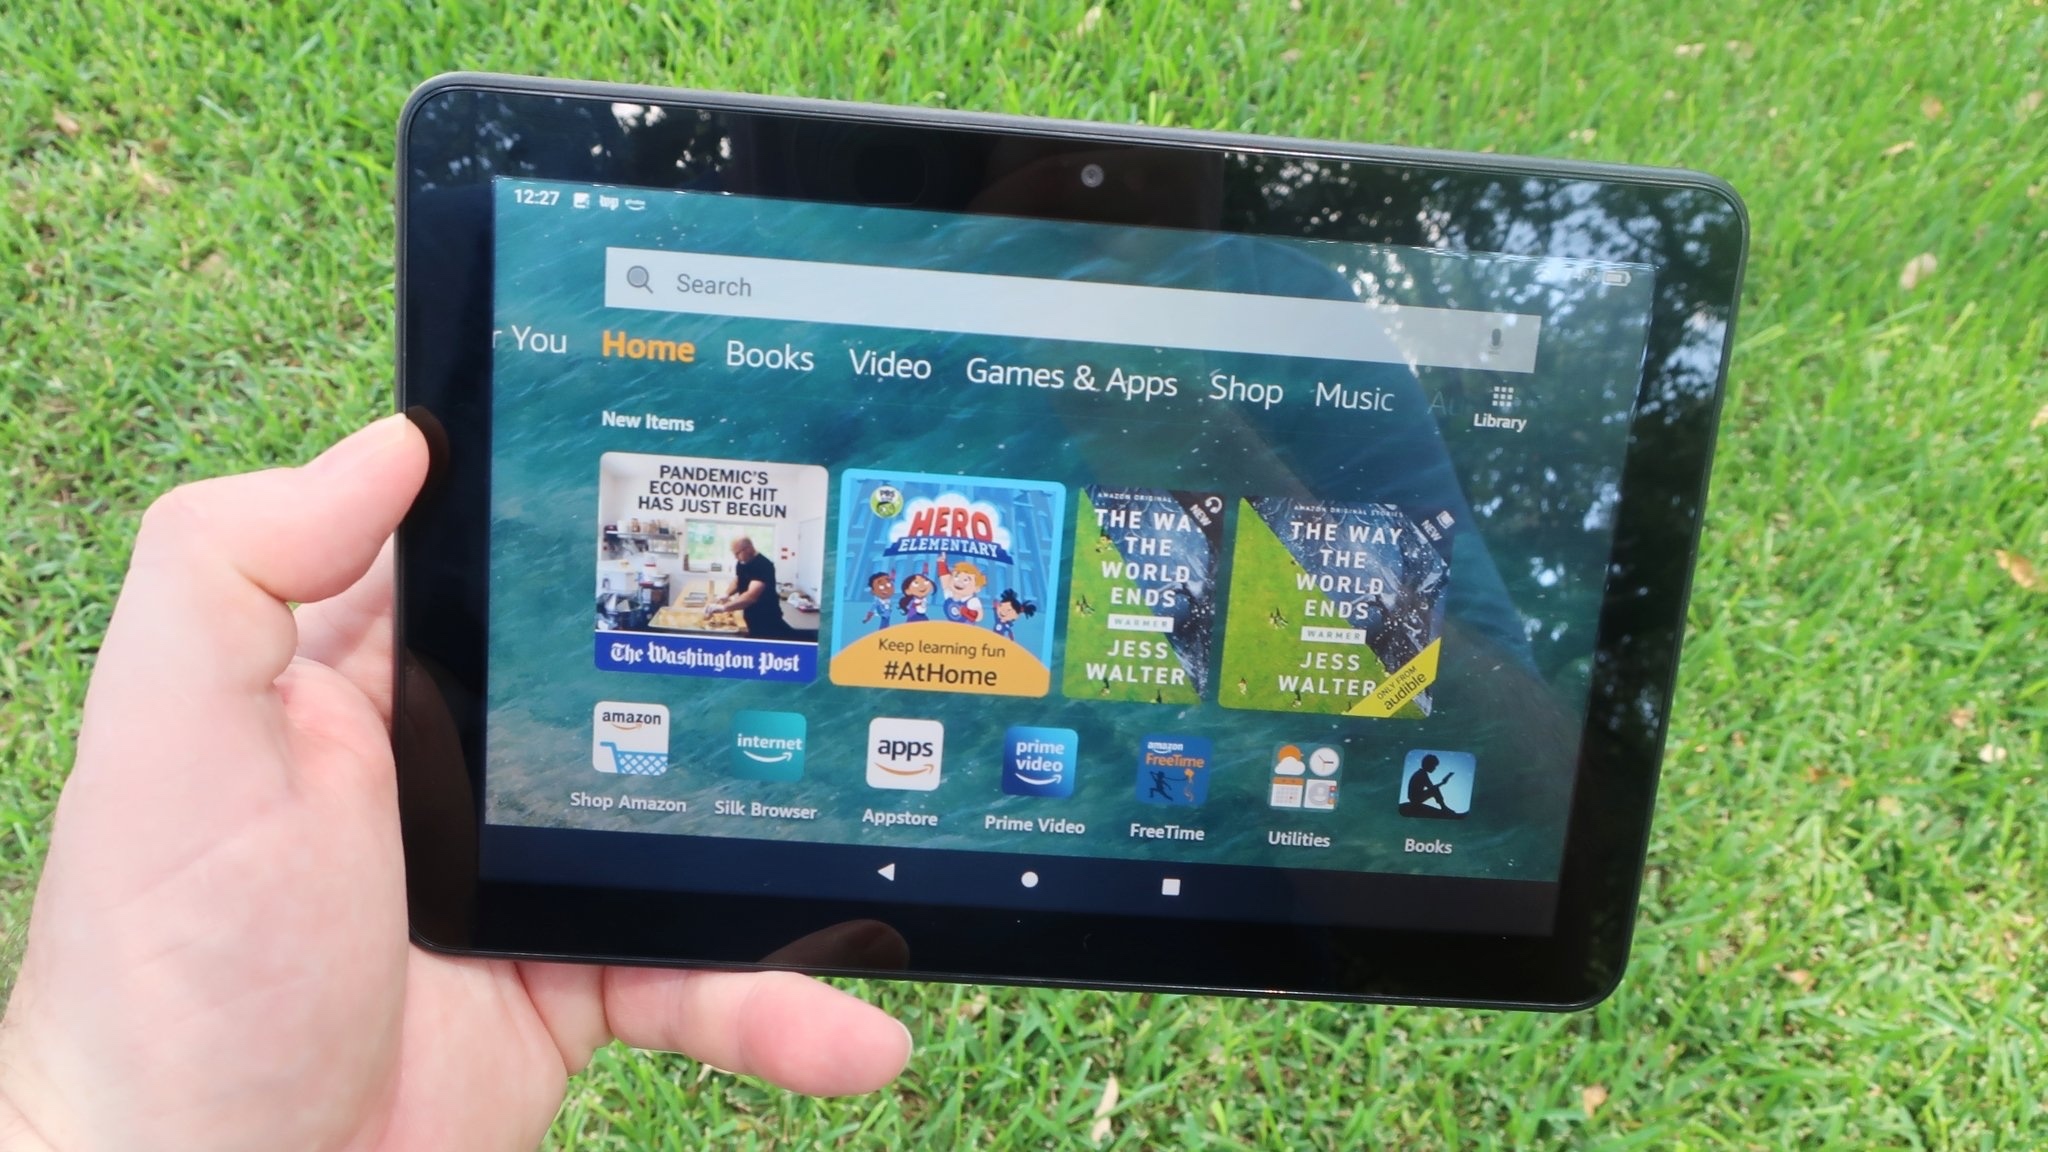 Amazon Fire HD 8 home screen within reach